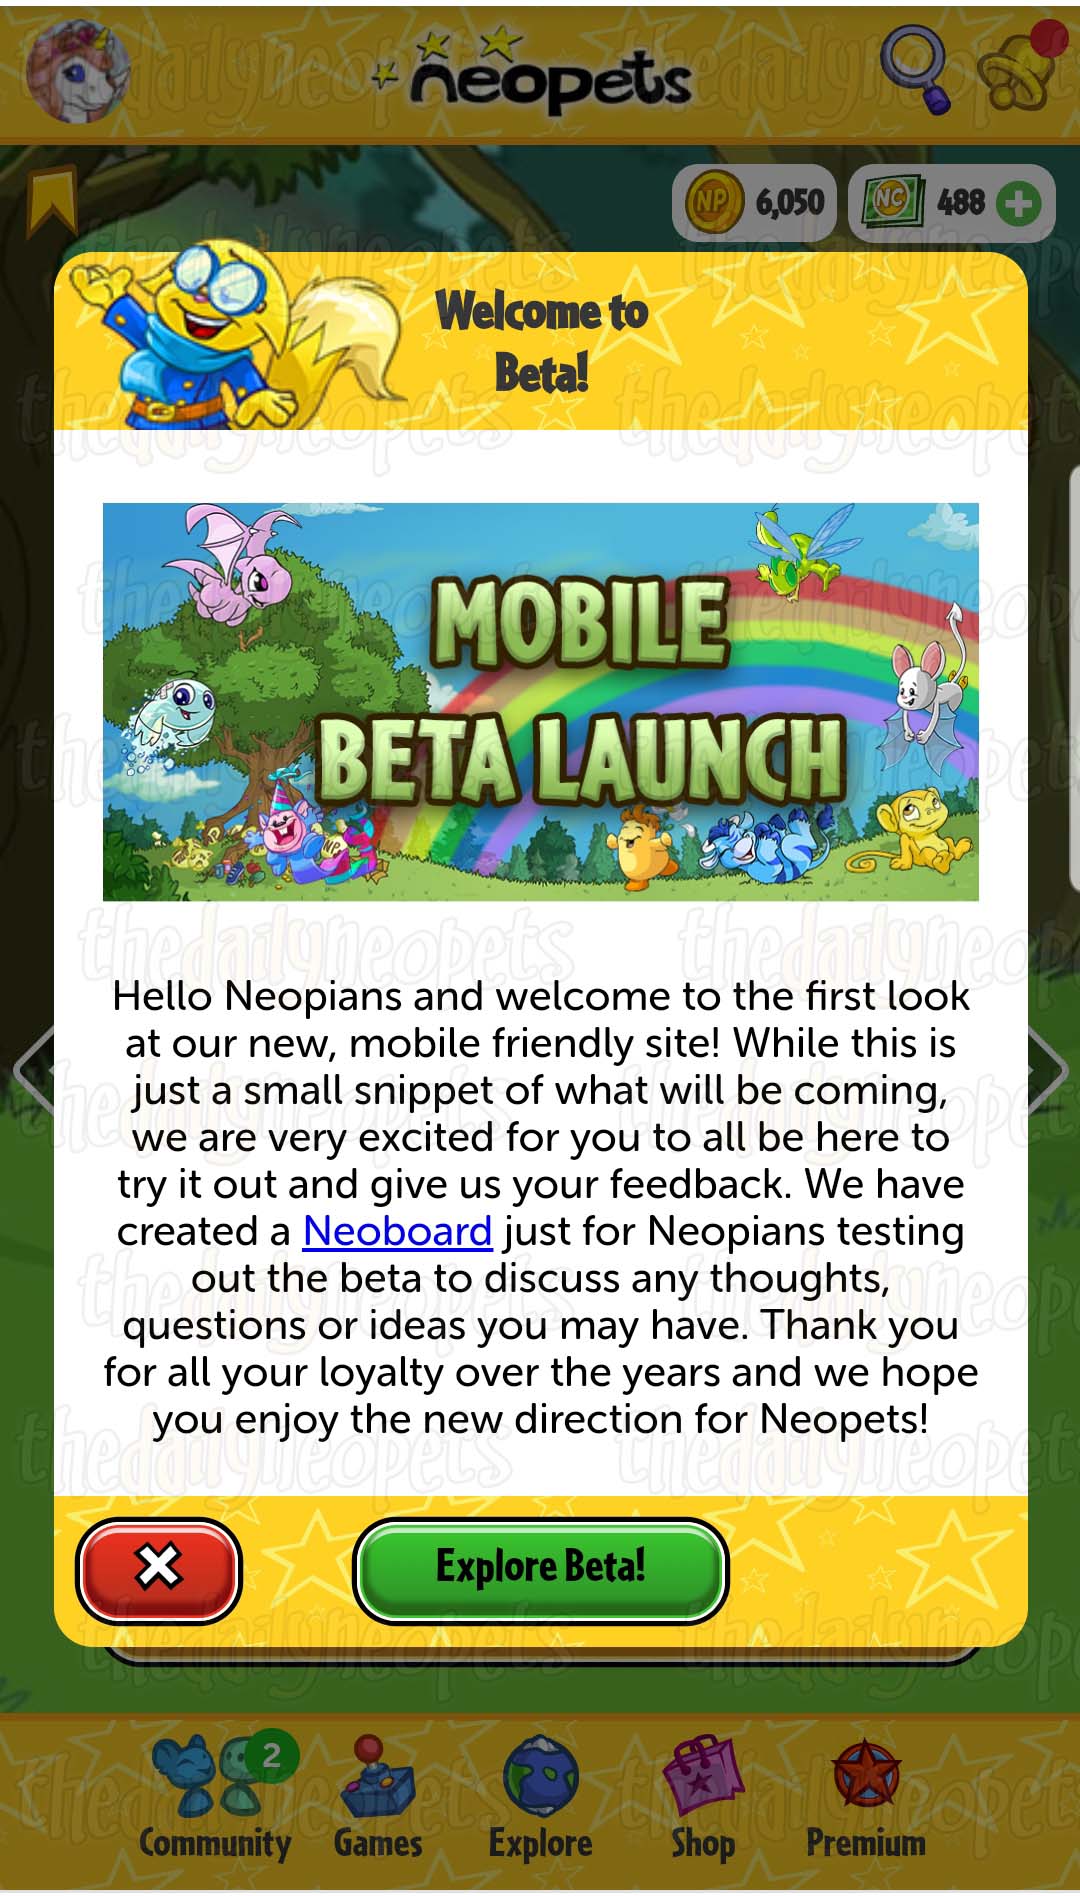 Decided to open the neopets site in my tablet - a better